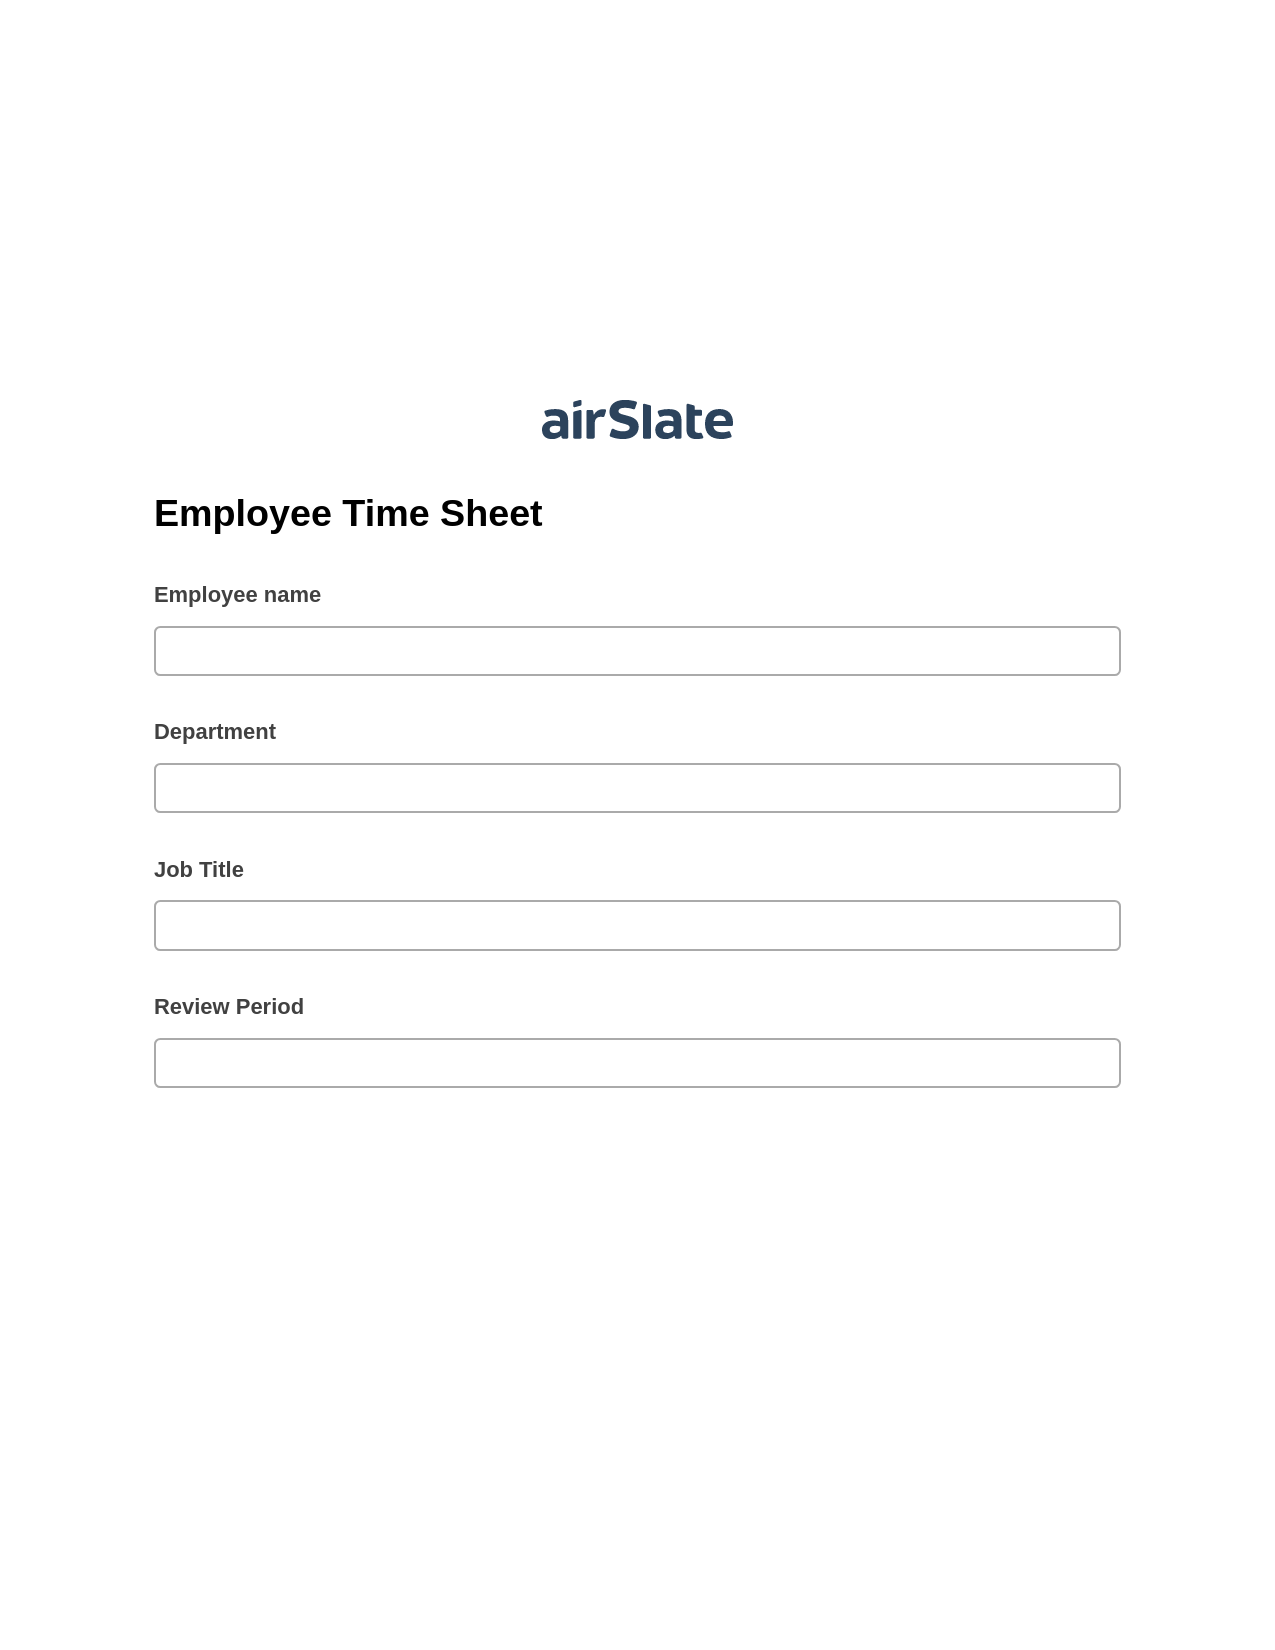 Employee Time Sheet Pre-fill from CSV File Bot, Create MS Dynamics 365 Records Bot, Export to NetSuite Bot